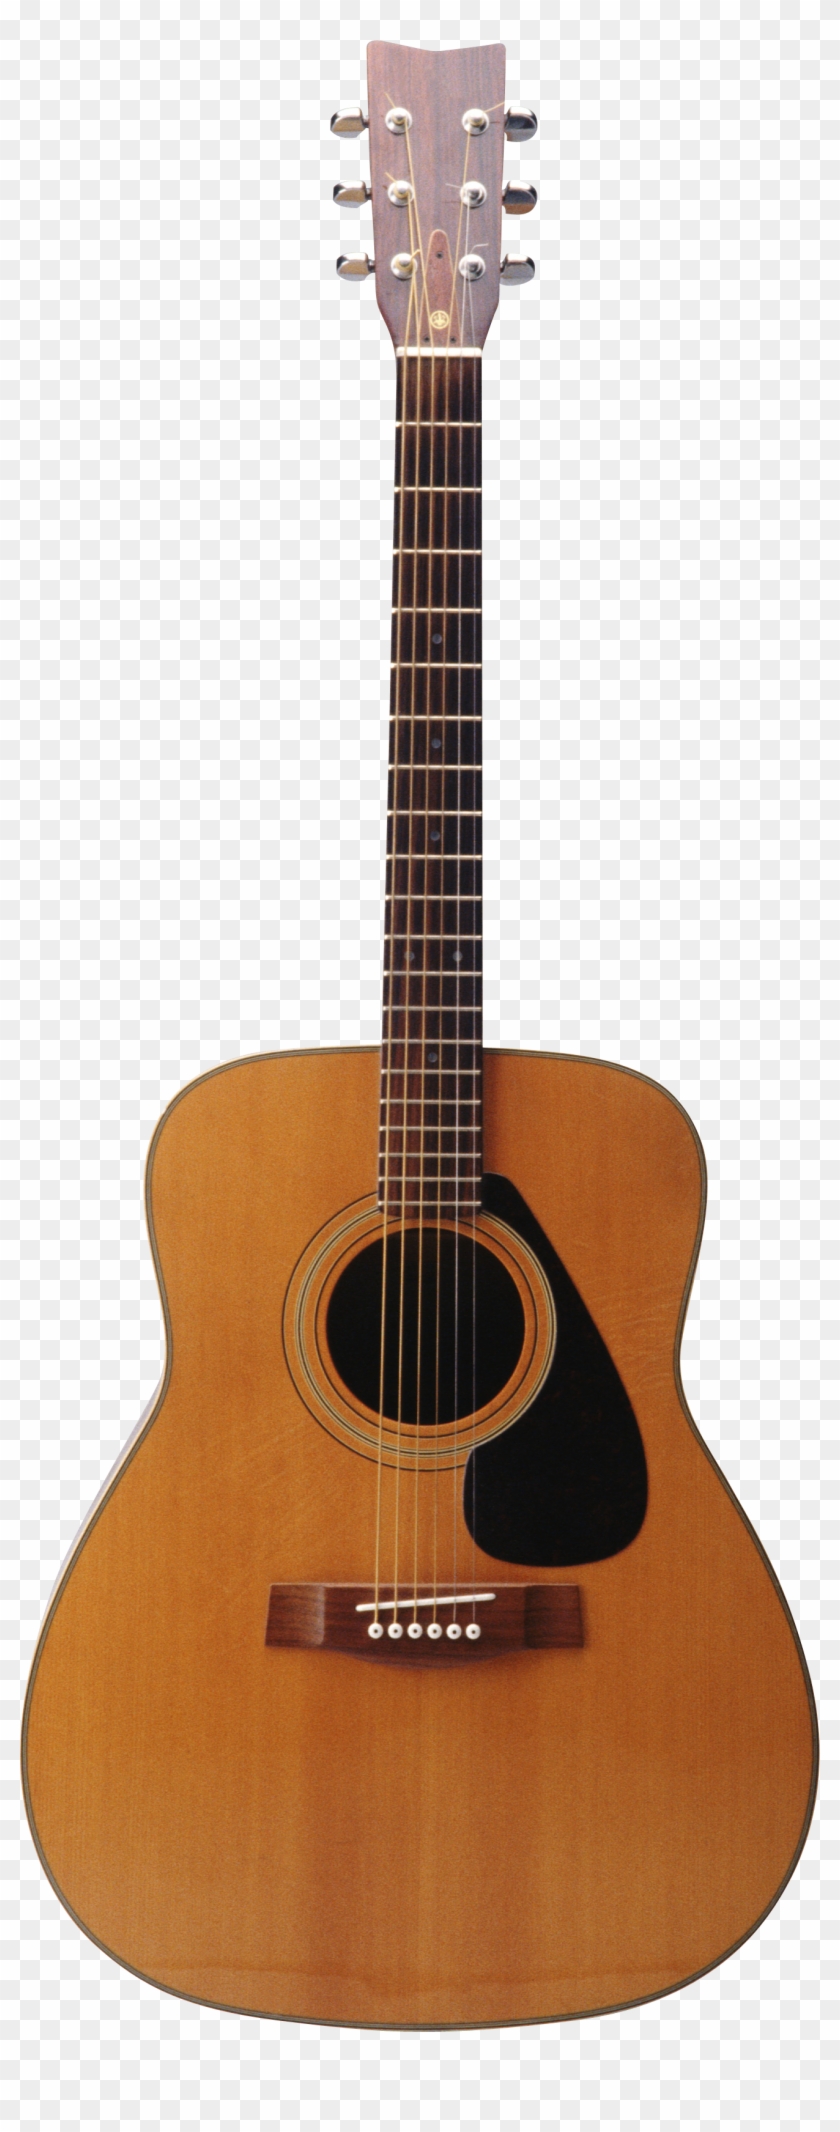 Guitar Png Images Free Picture Download - Guitar Png #417025